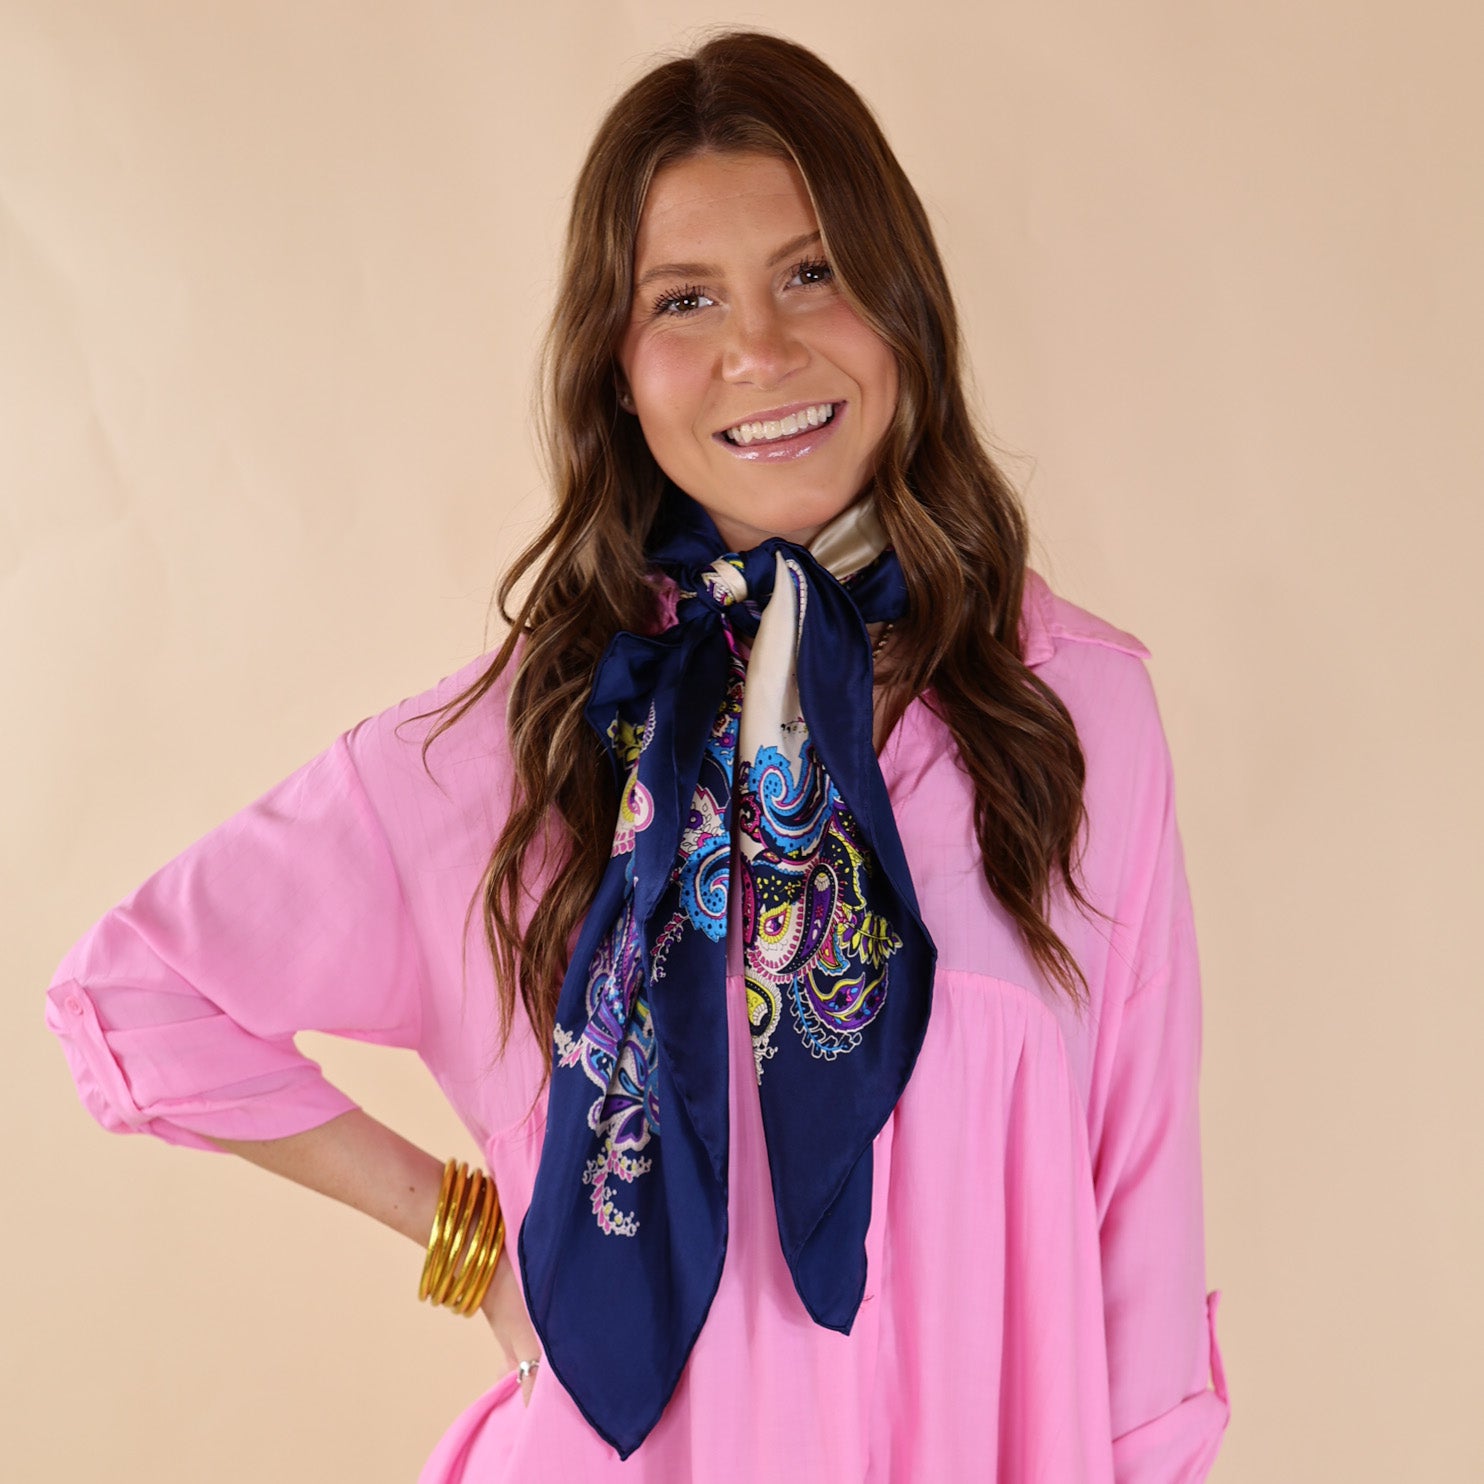 Brunette model wearing a Pink, drop shoulder top with Multicolored scarf tied around her neck. Model is pictured in front of a beige background.